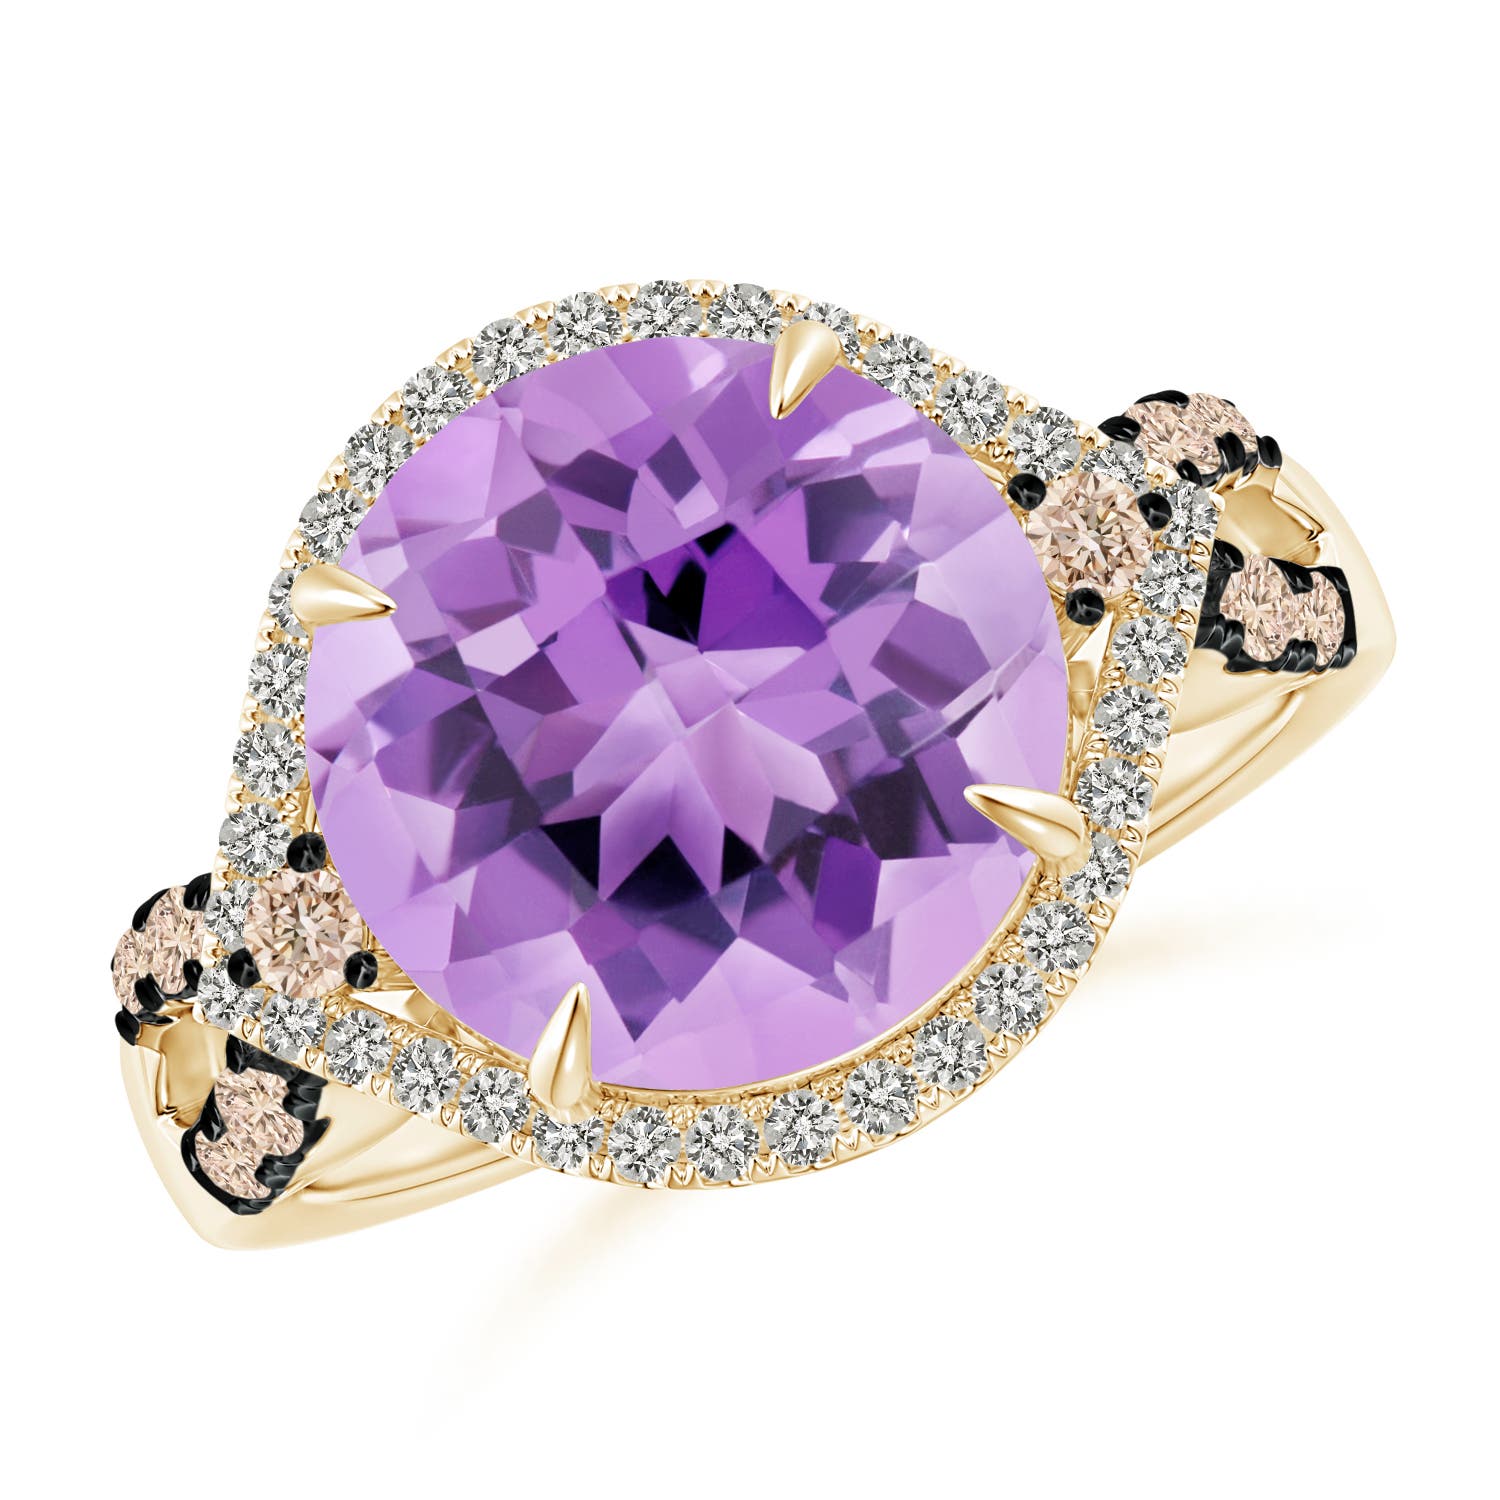 A - Amethyst / 4.64 CT / 14 KT Yellow Gold